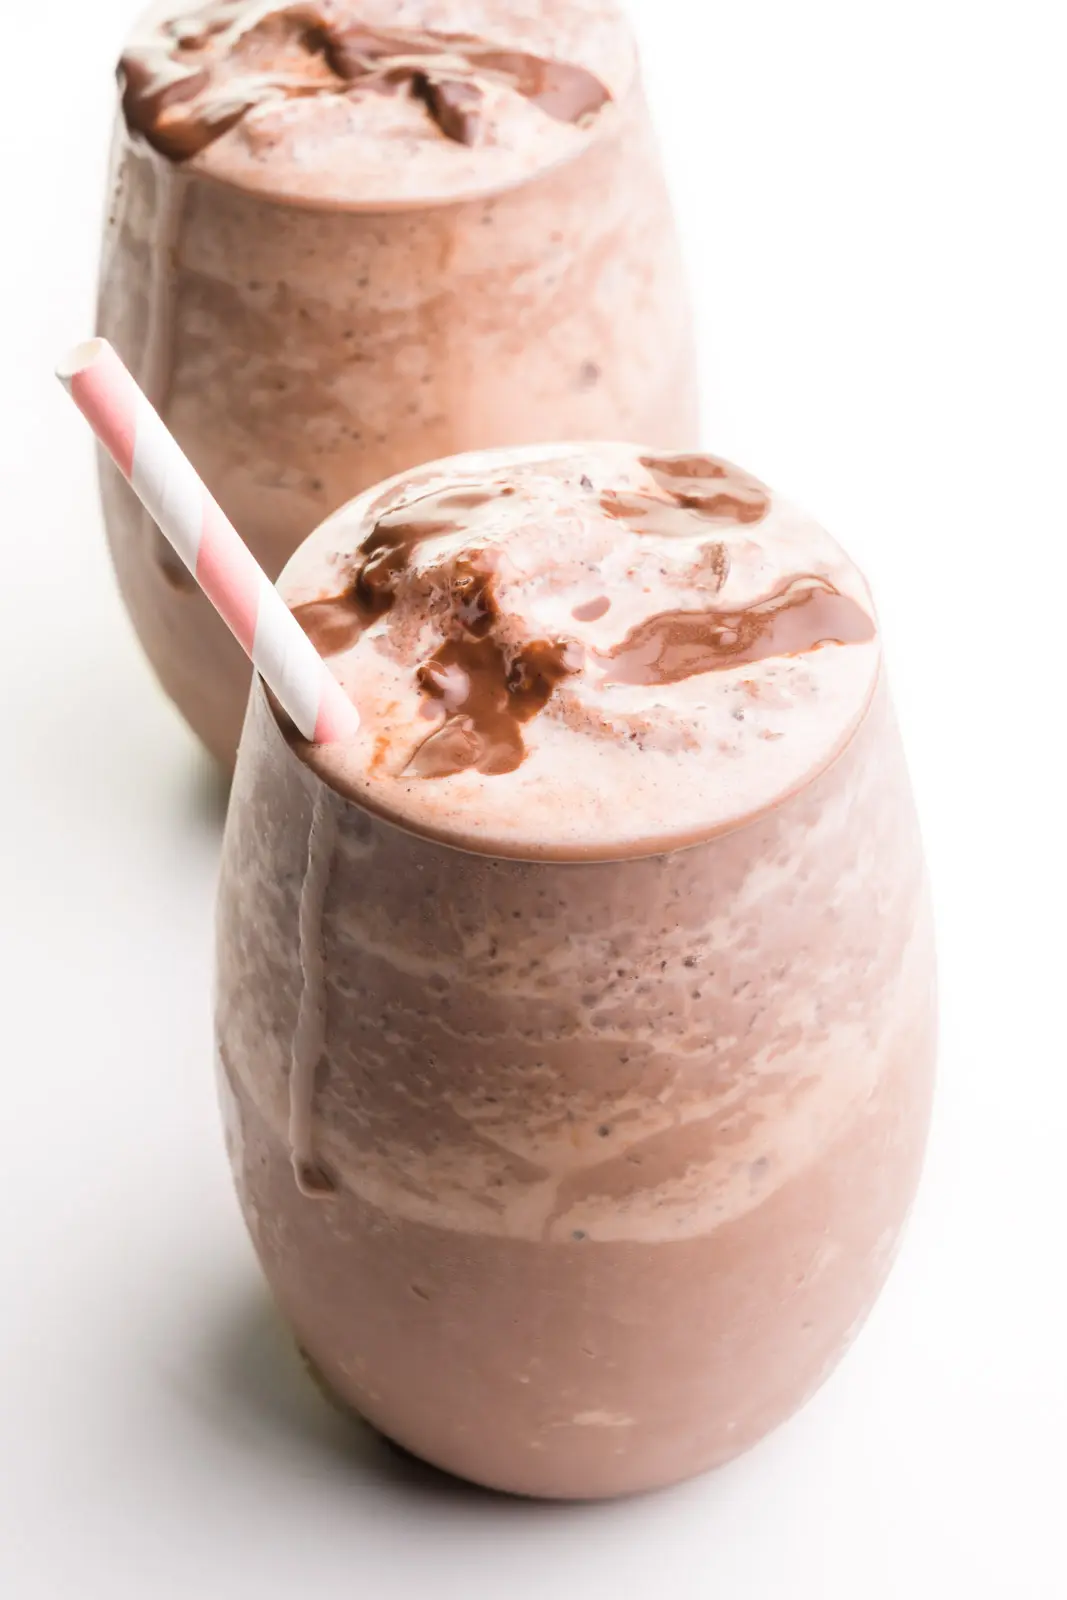 Two glasses hold vegan chocolate milkshakes with chocolate syrup and paper straws.